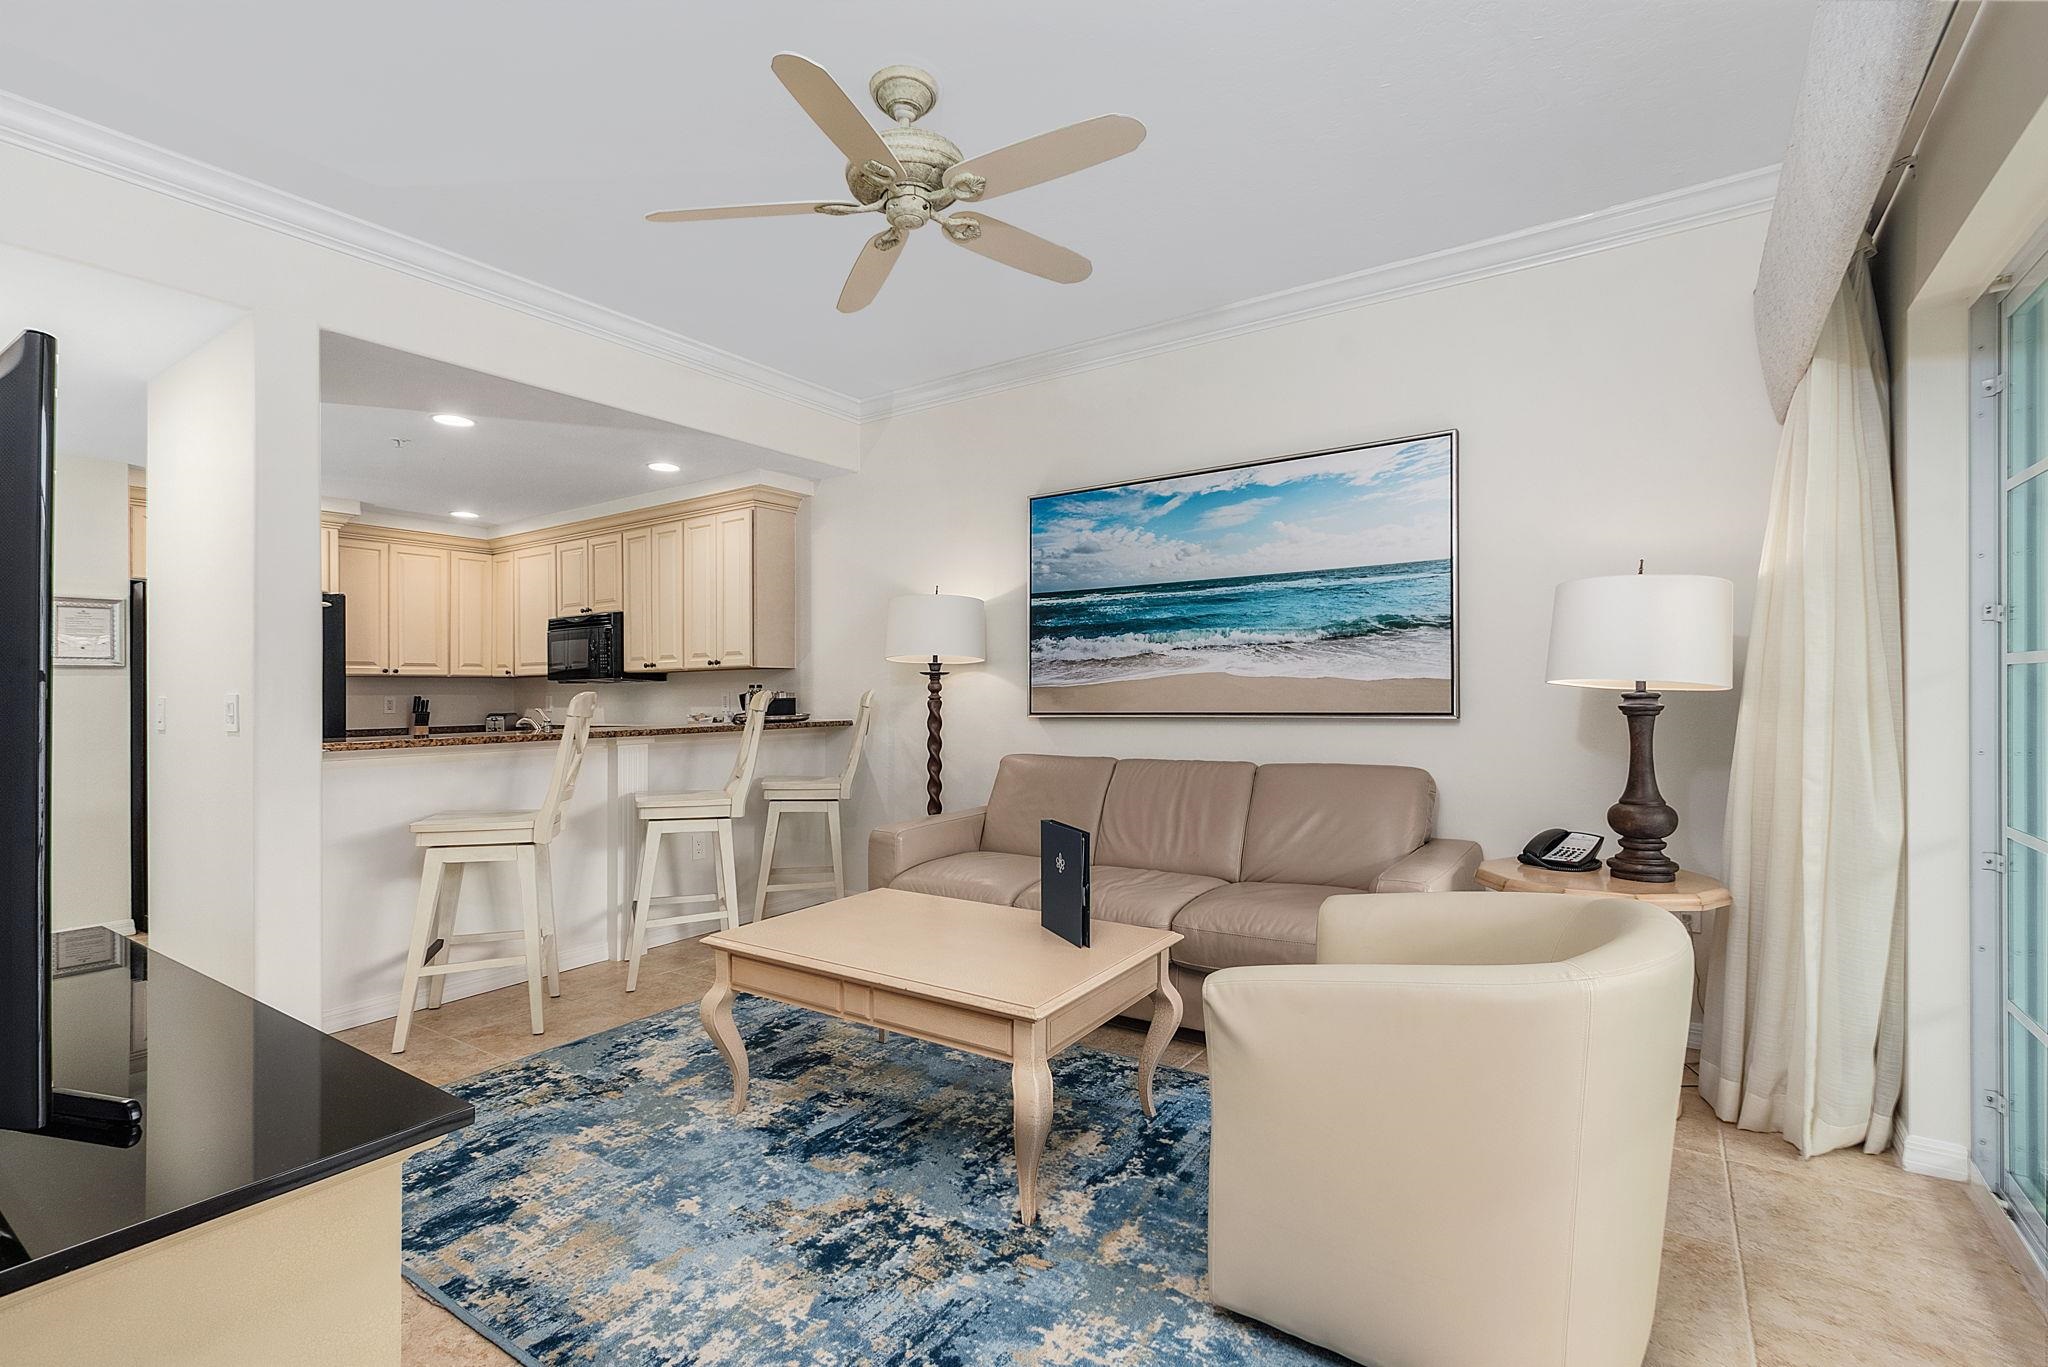 221 9Th St S, Naples, Florida 34102, 1 Bedroom Bedrooms, ,1 BathroomBathrooms,Condo,For Sale,9Th St S,2230455